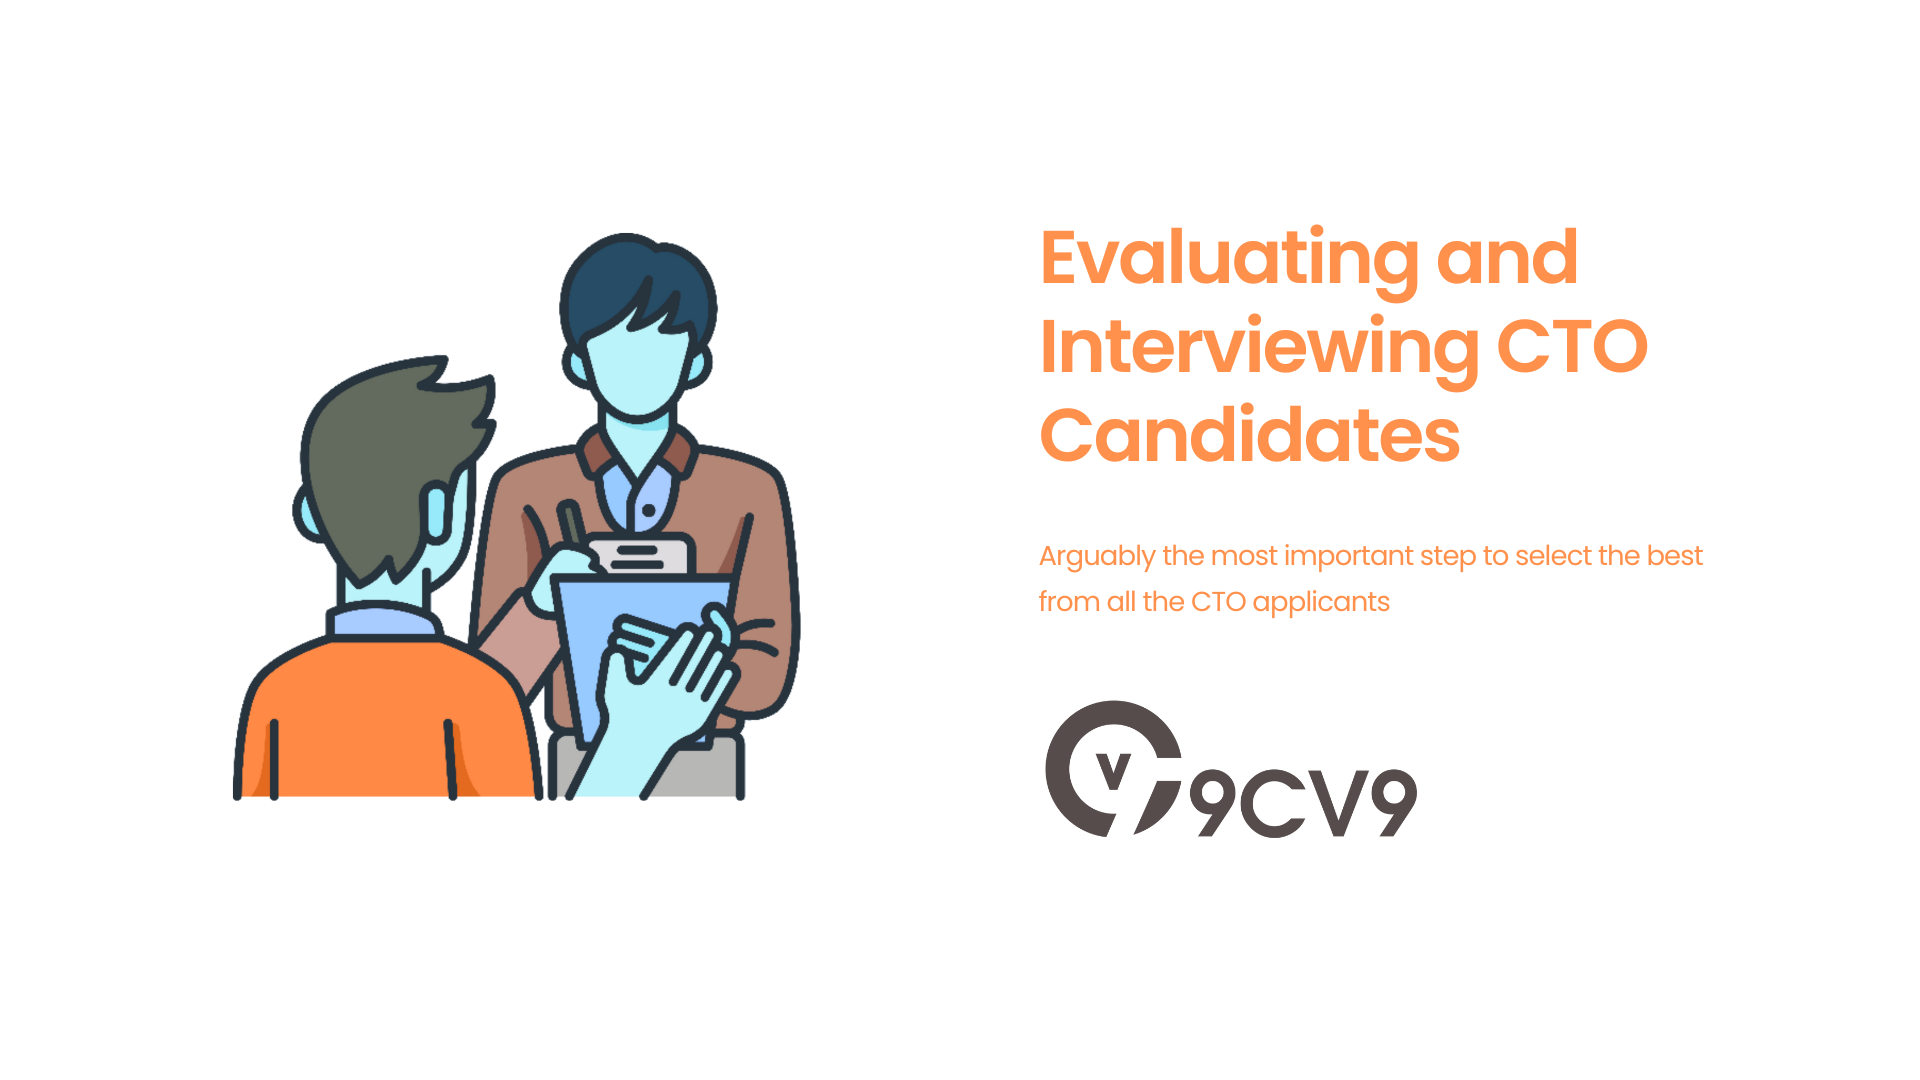 Evaluating and Interviewing CTO Candidates